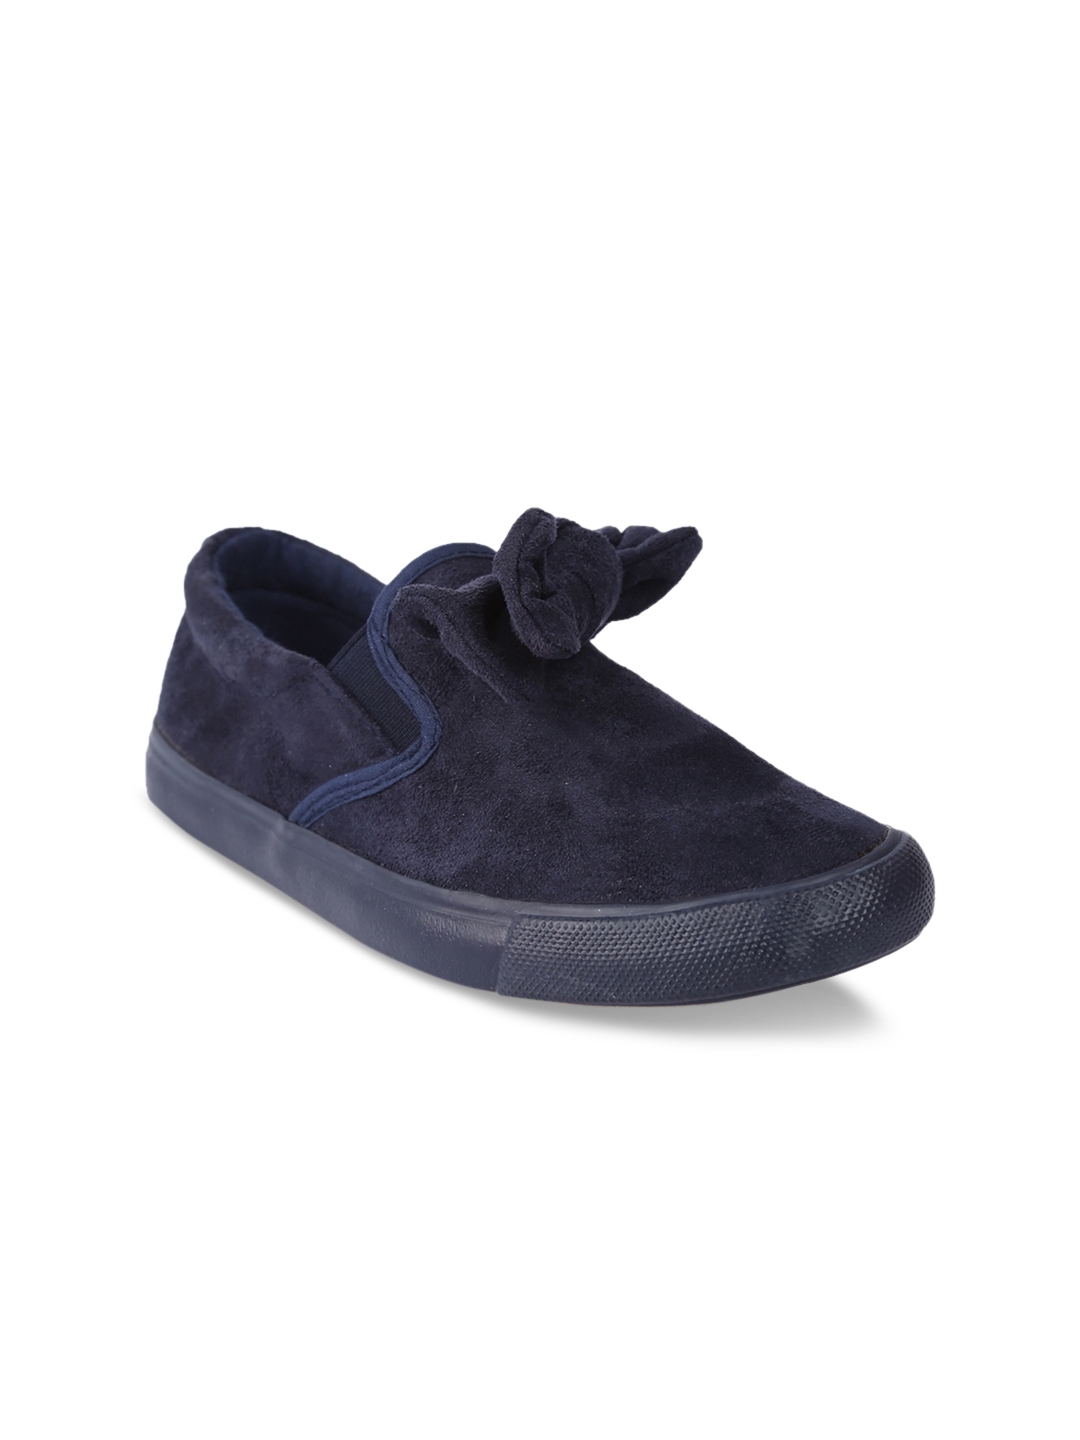 Buy Lovely Chick Women Navy Blue Suede Slip On Sneakers - Casual Shoes ...